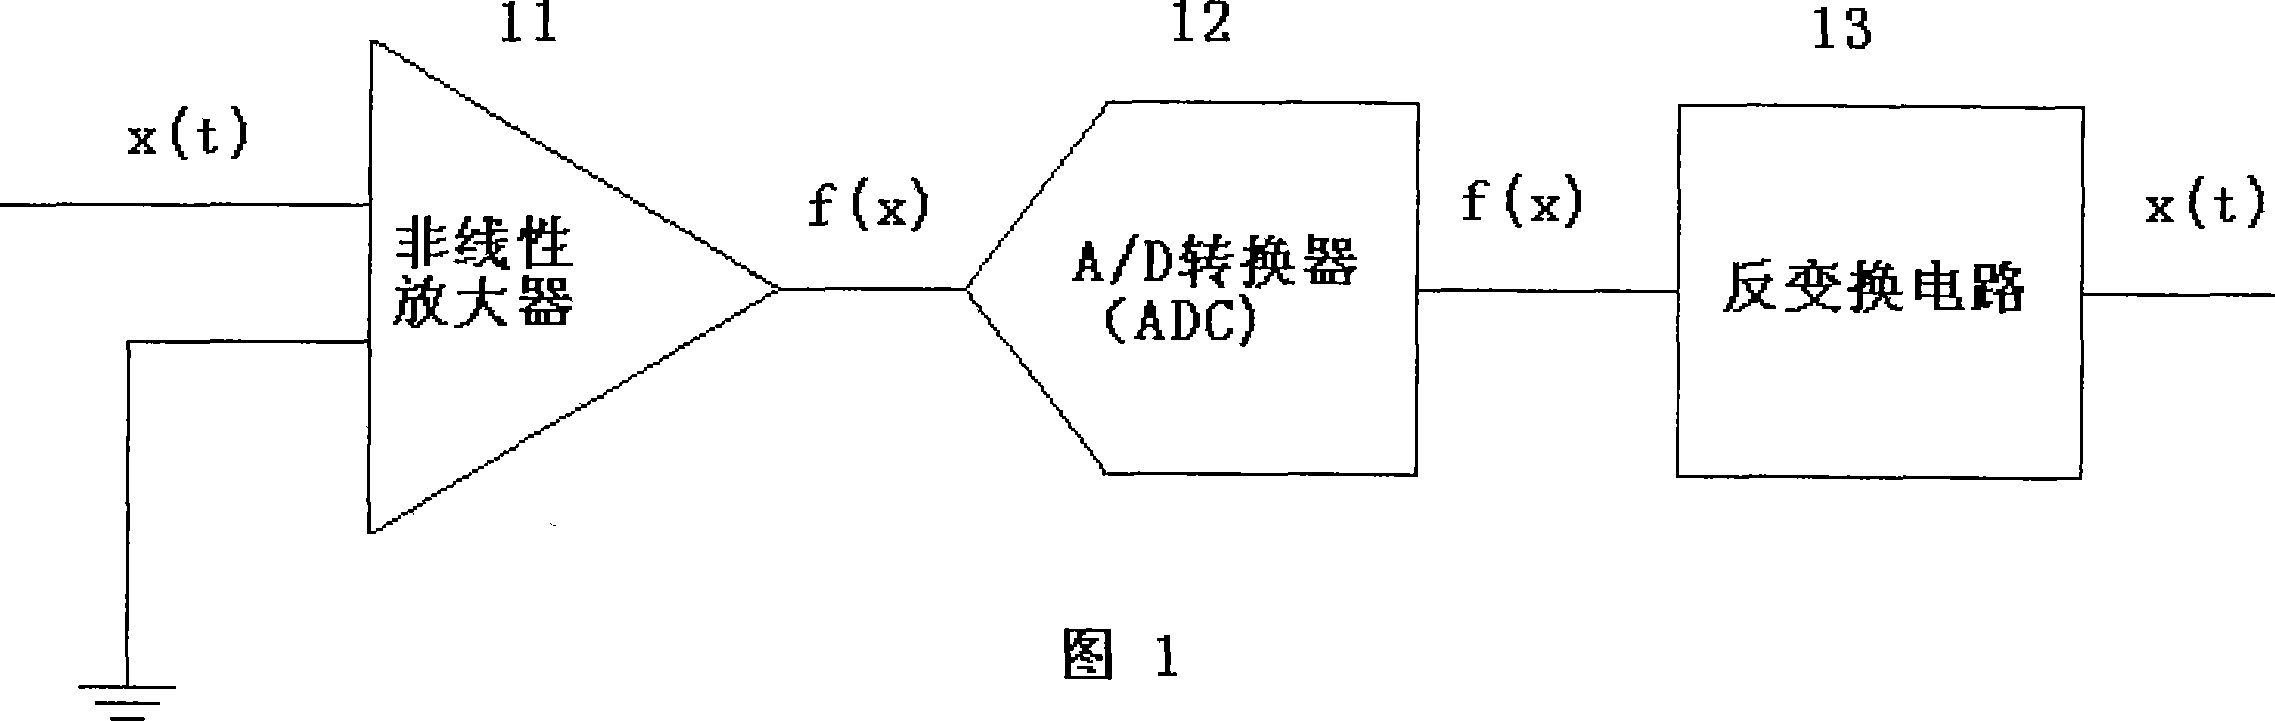 Analog digital A/D converting circuit structure used for broad band communication